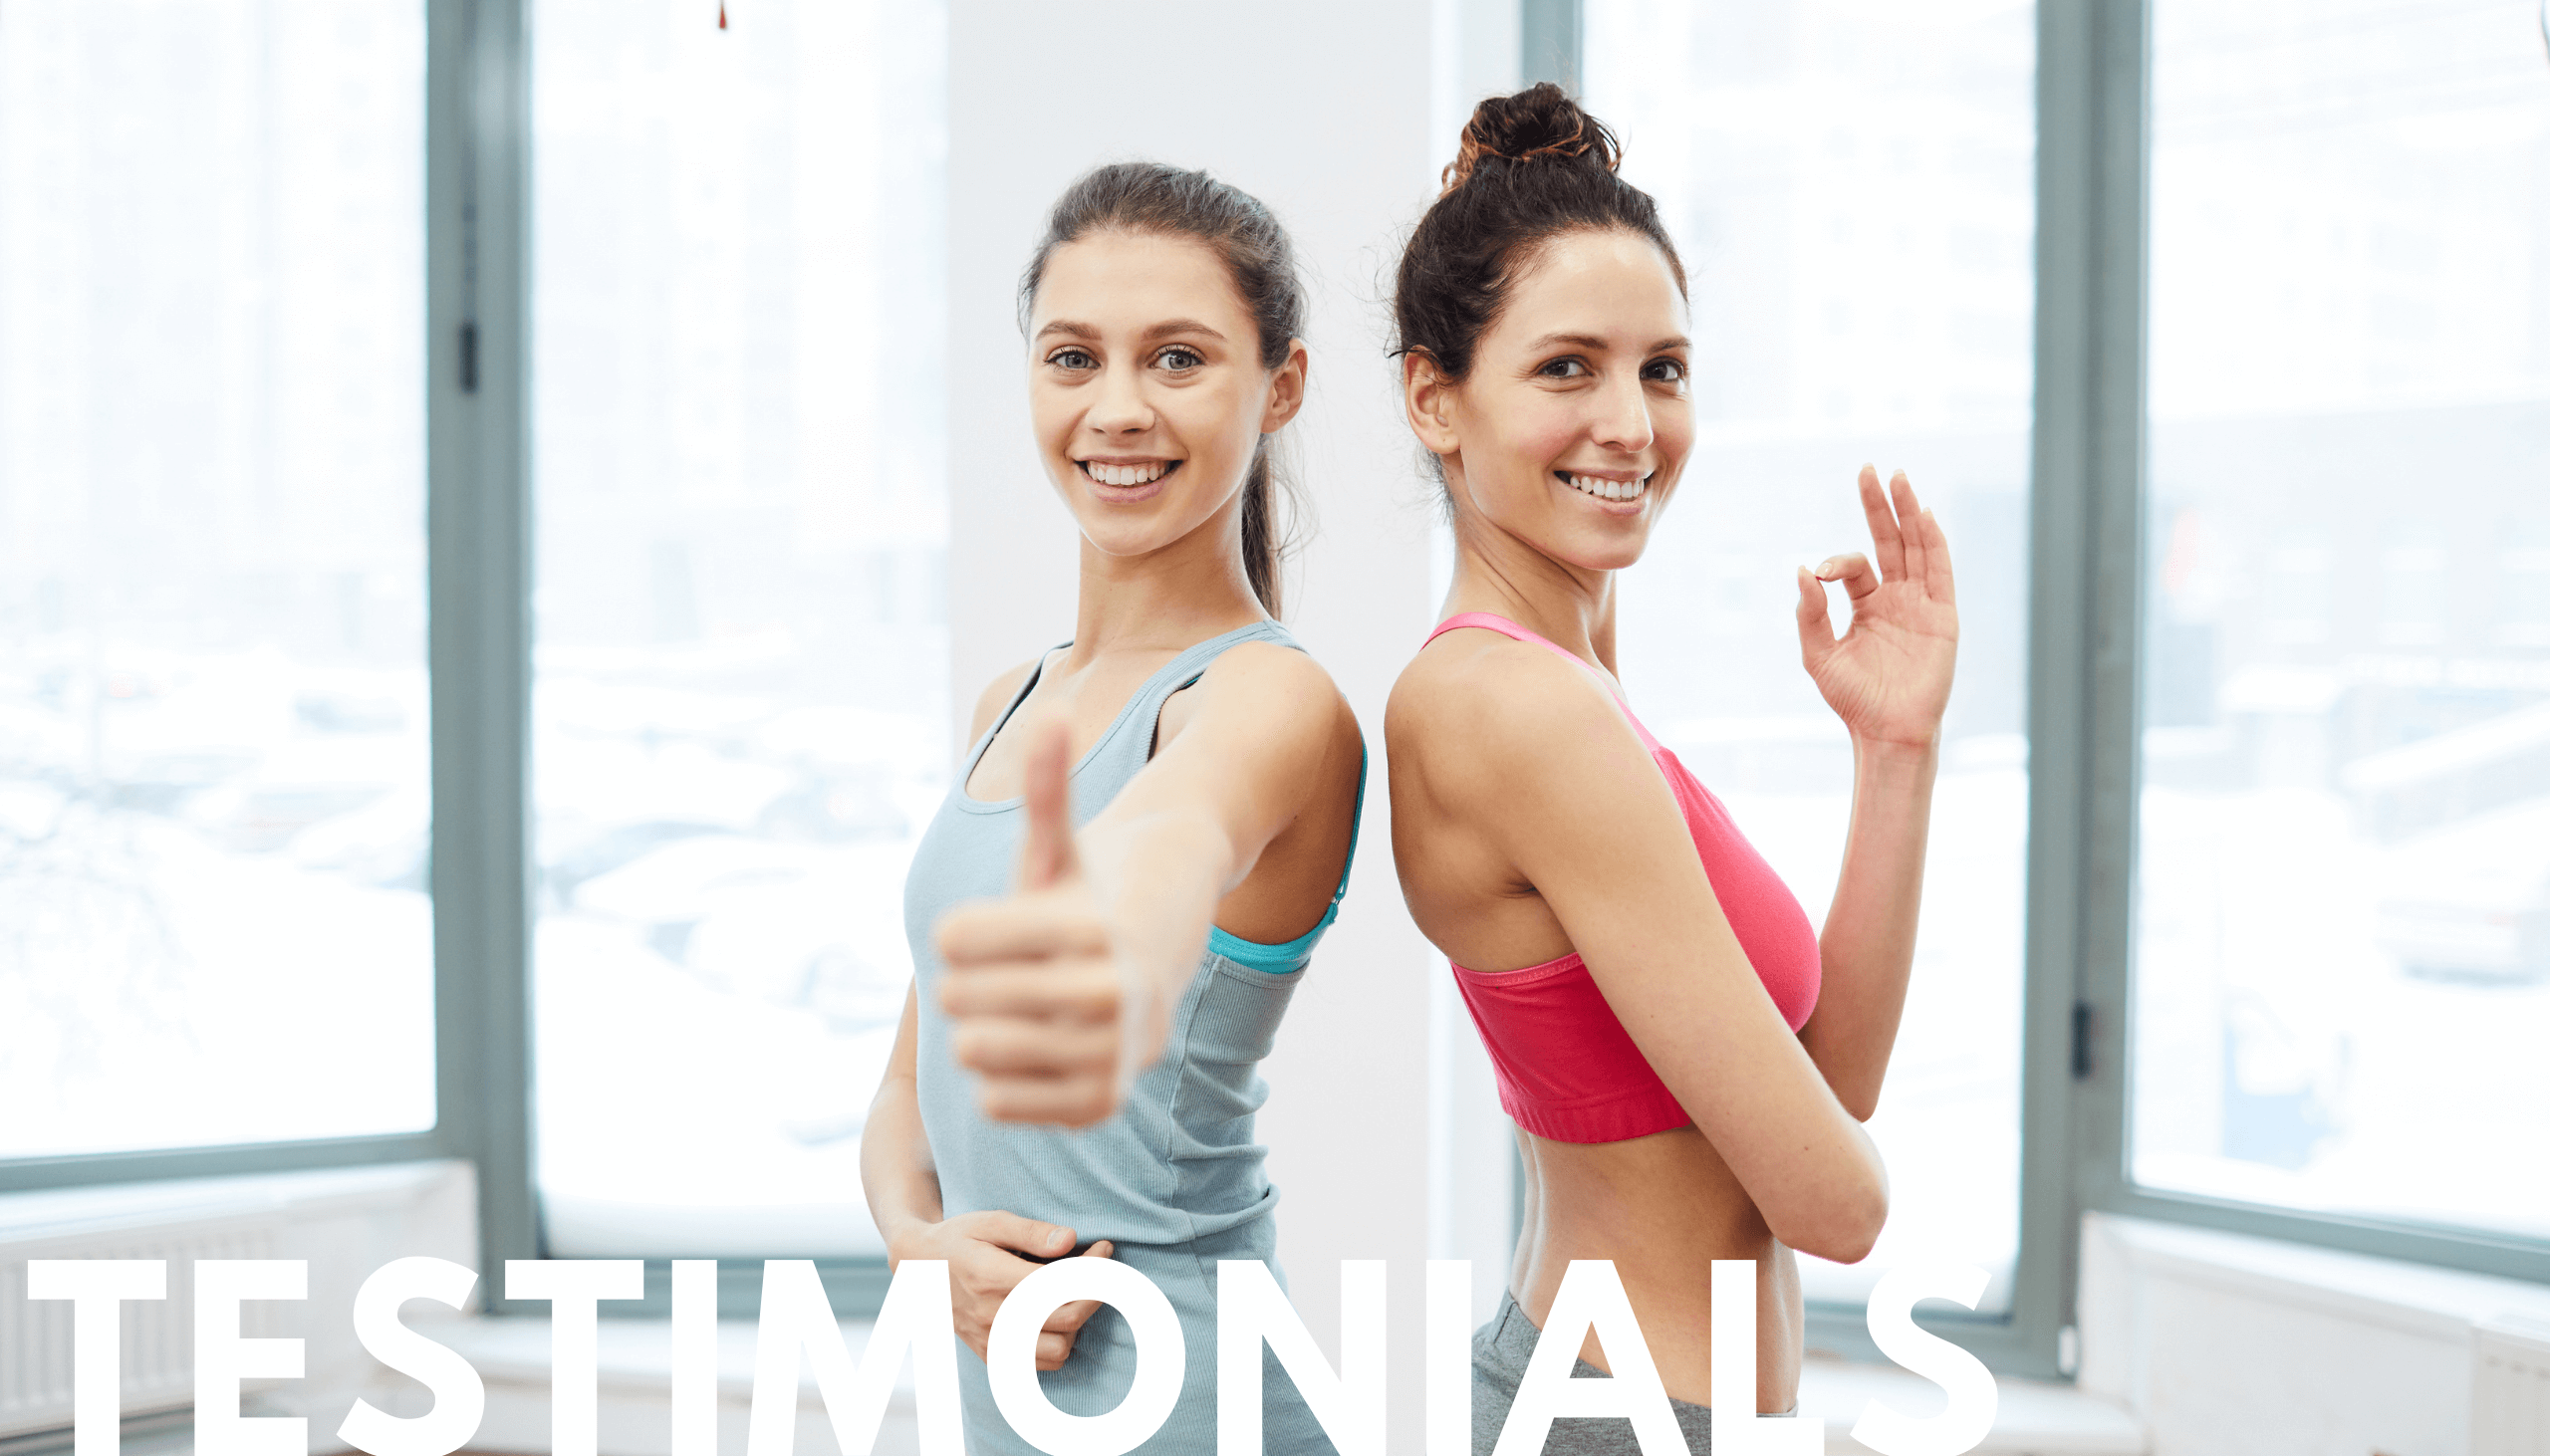 Testimonials hero two ladies posing and giving thumbs up in personal training nanaimo session